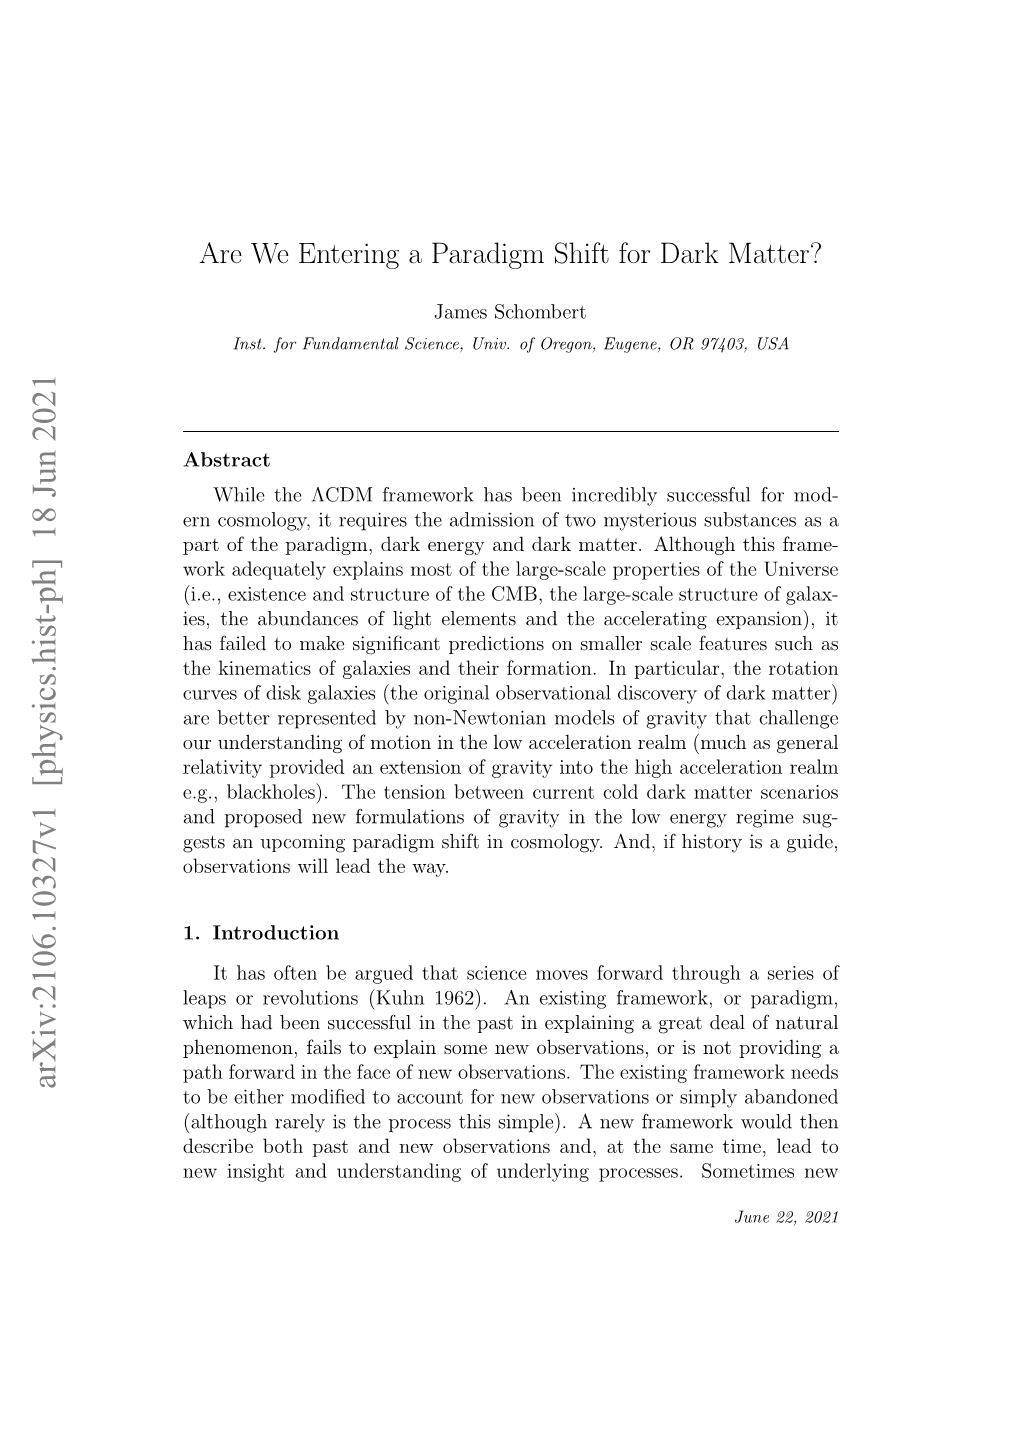 Are We Entering a Paradigm Shift for Dark Matter?